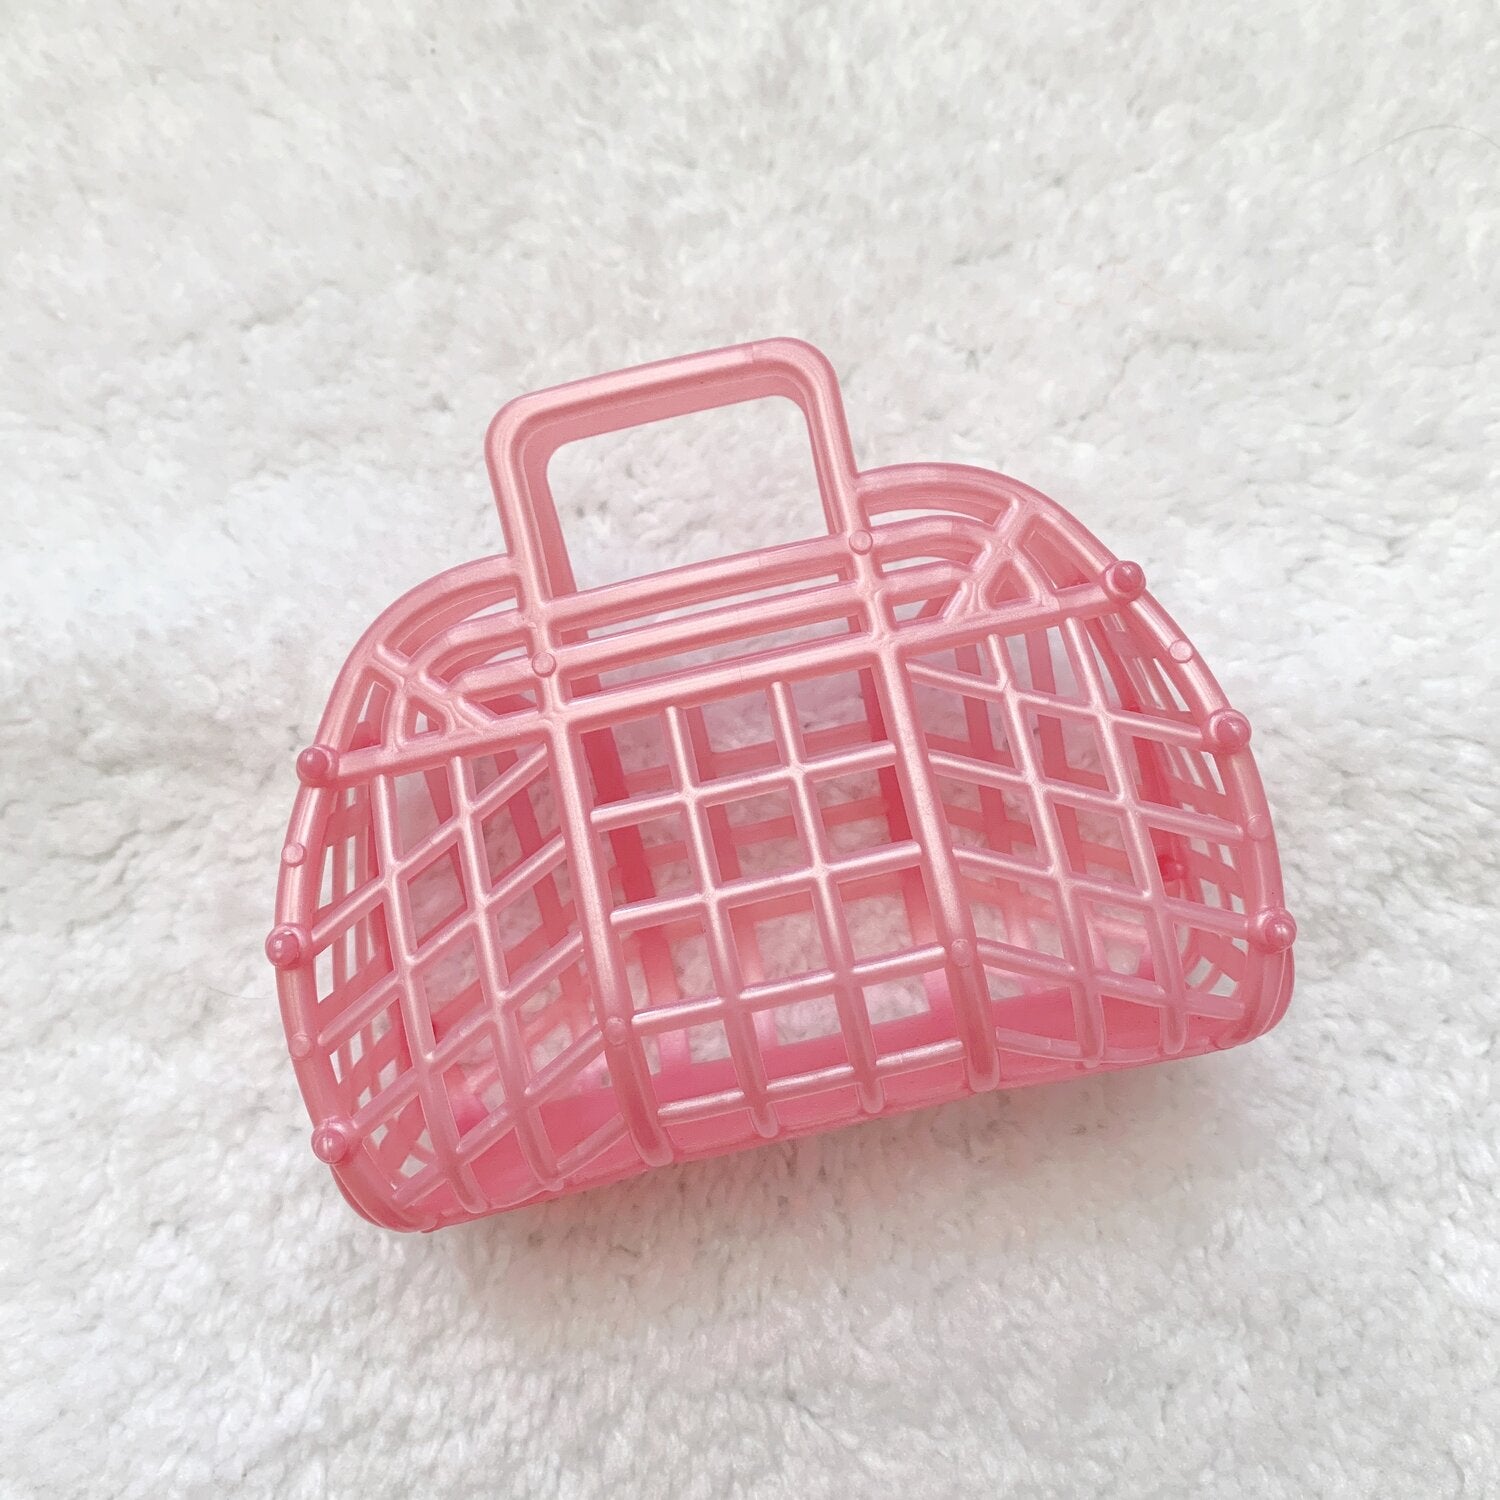 Glossy Pink Itty Bitty Jelly Bag